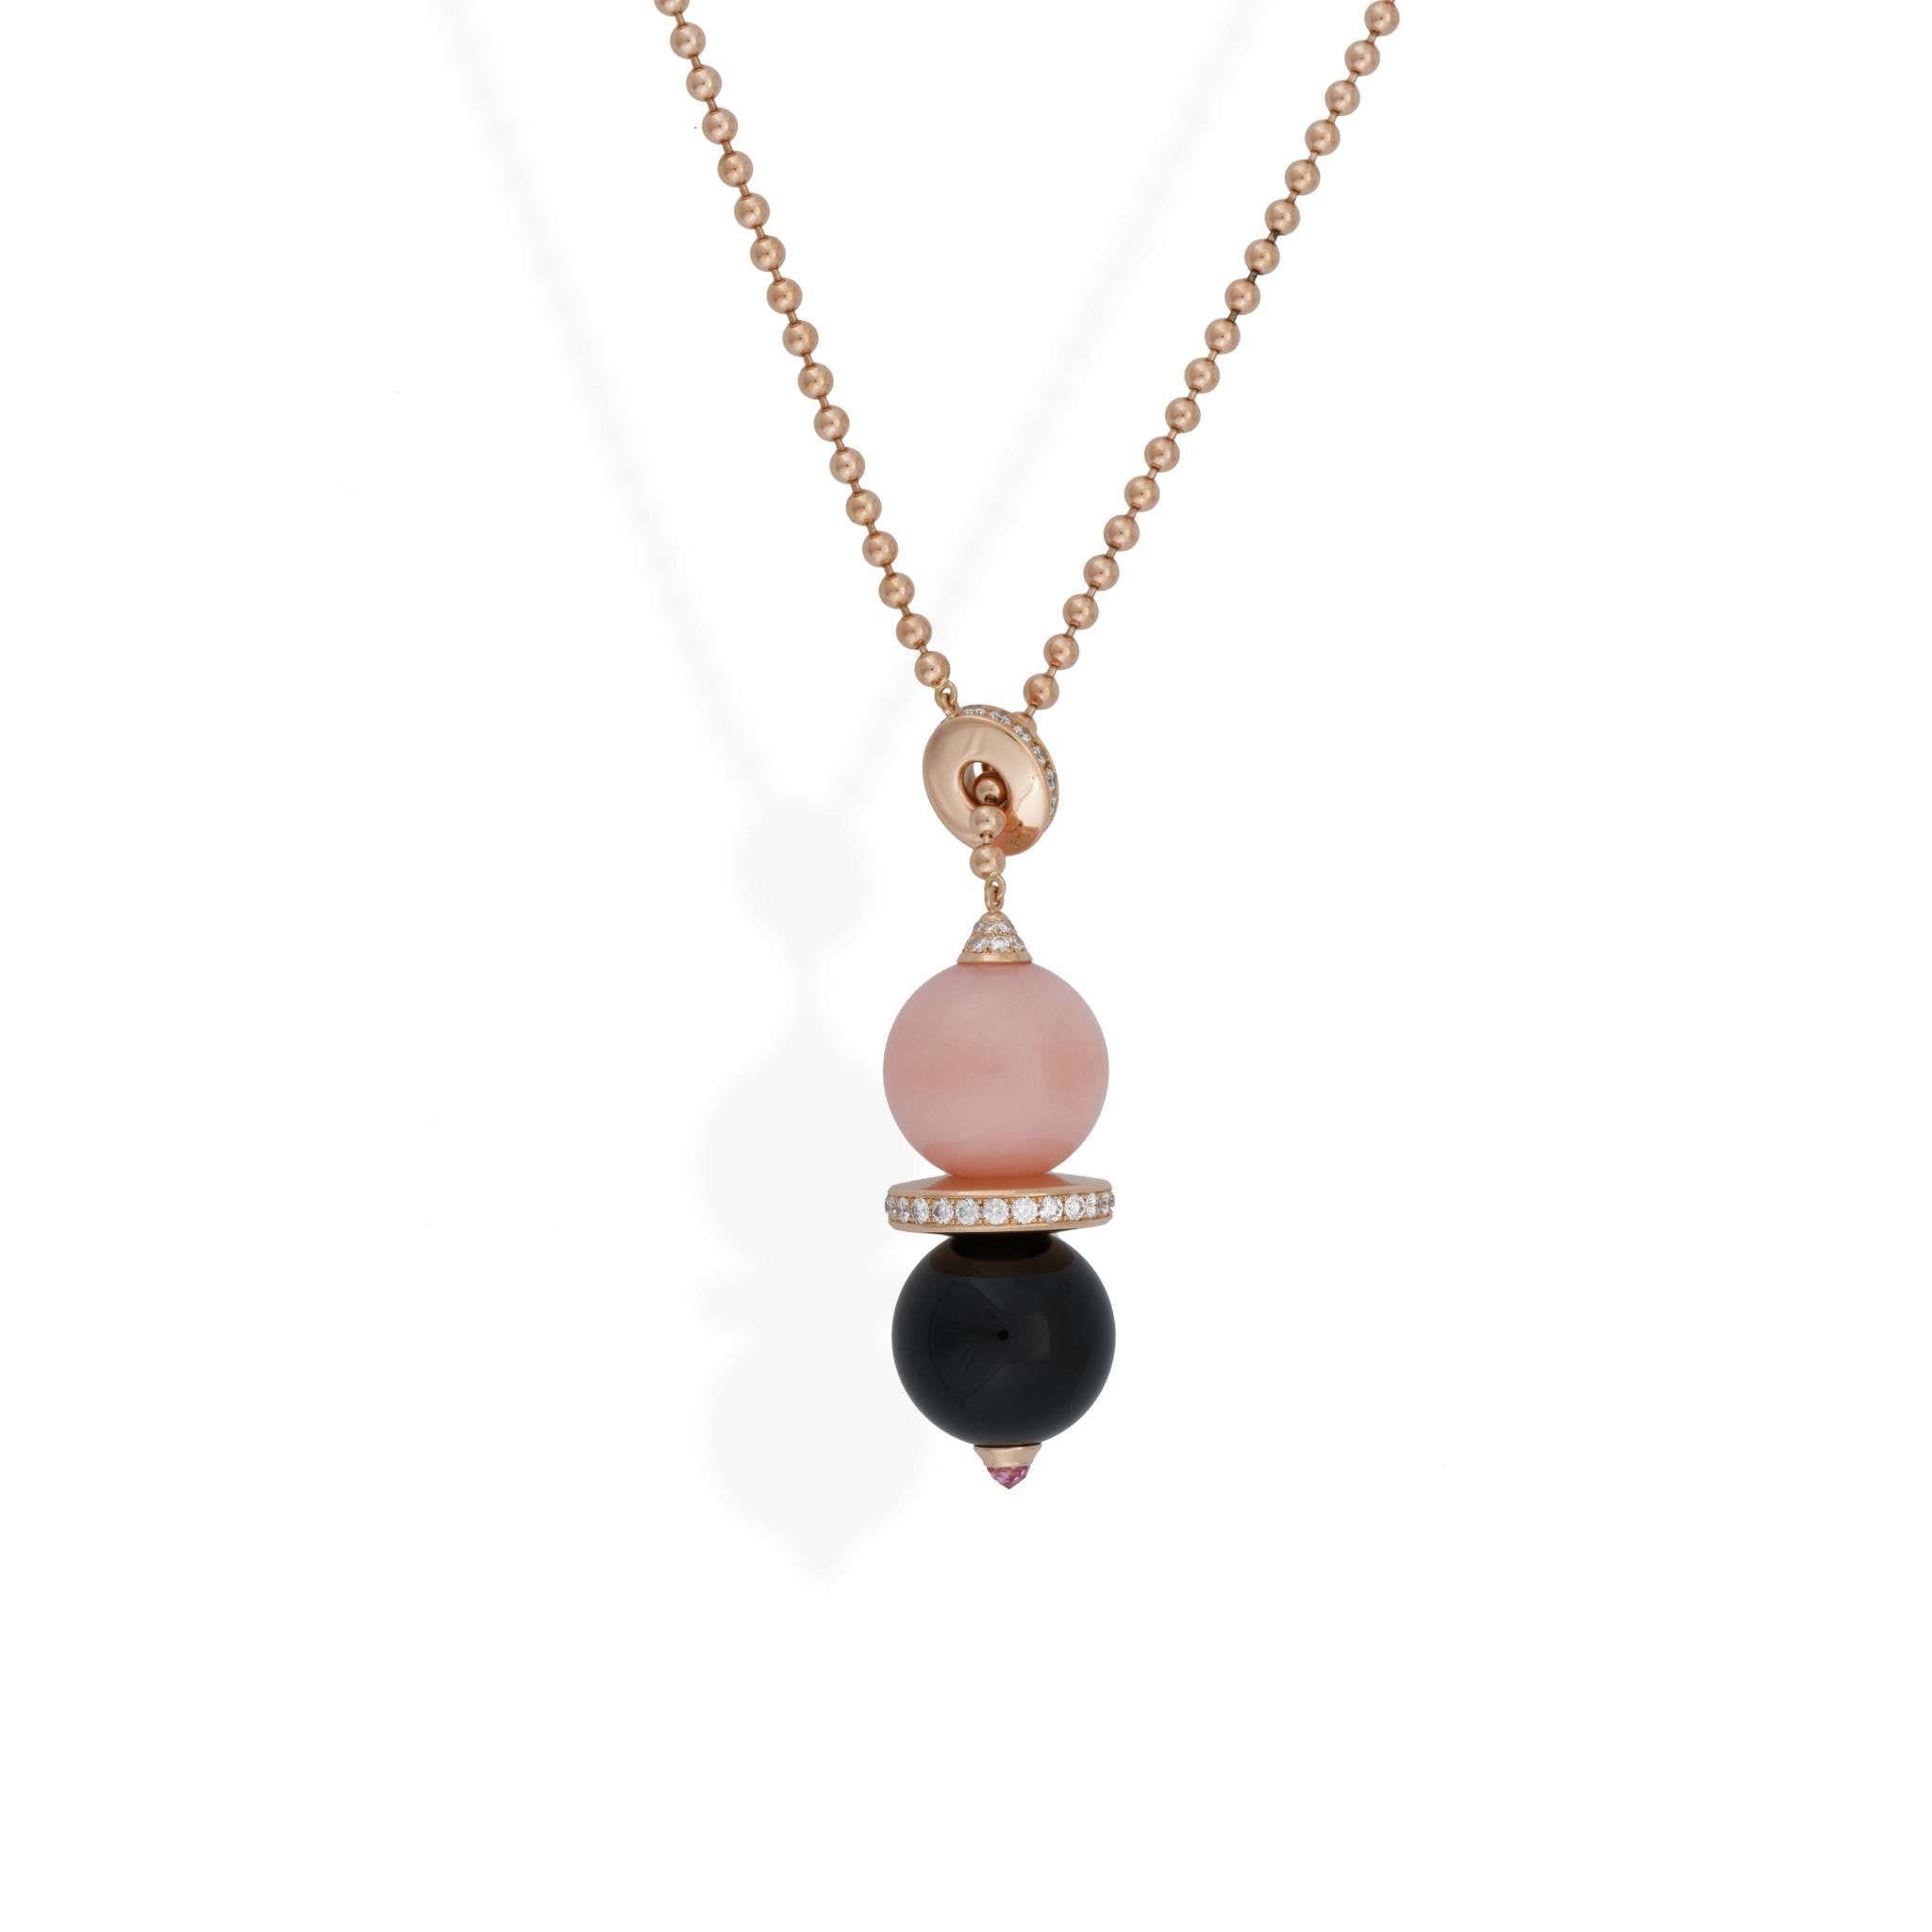 METAL TYPE: 18K Rose Gold
STONE WEIGHT: 2.8ct twd
TOTAL WEIGHT: 13.1g
NECKLACE LENGTH: 18